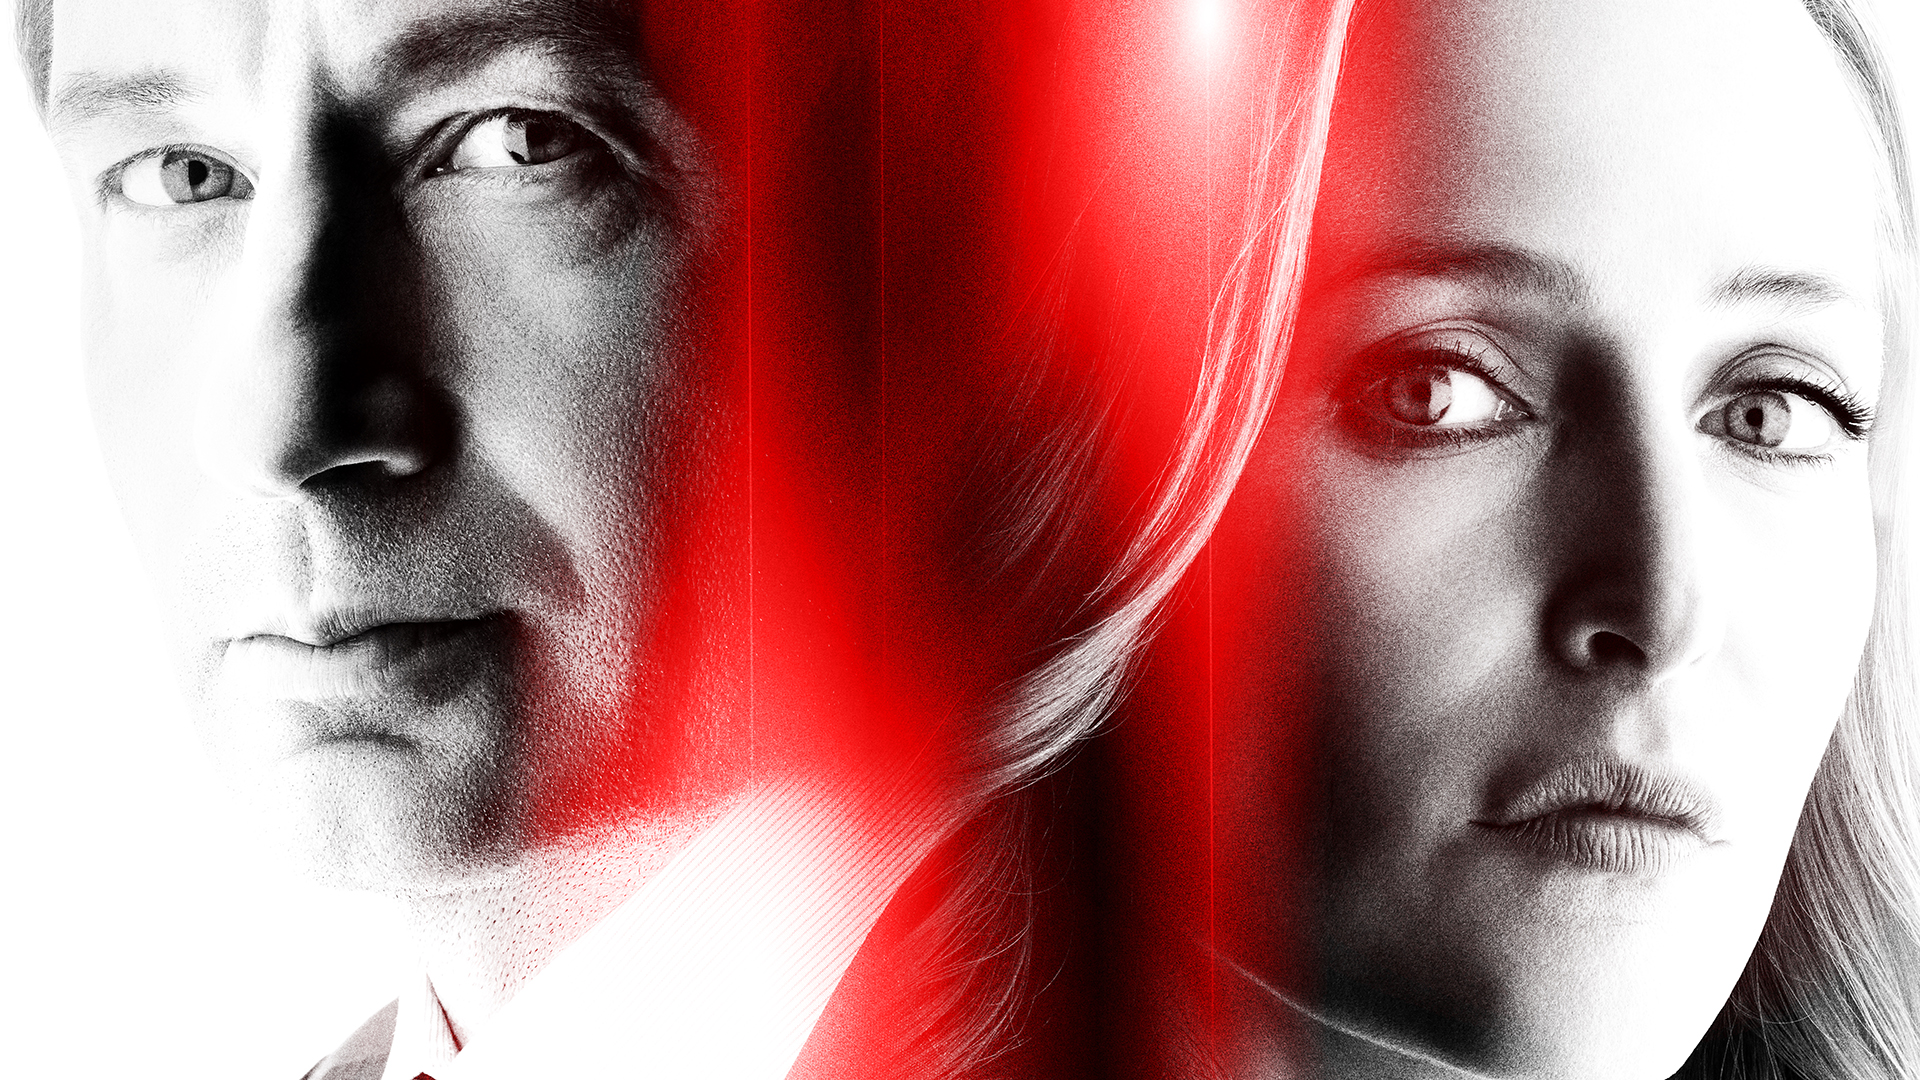 The X Files - X Files Season 11 Dvd Cover , HD Wallpaper & Backgrounds